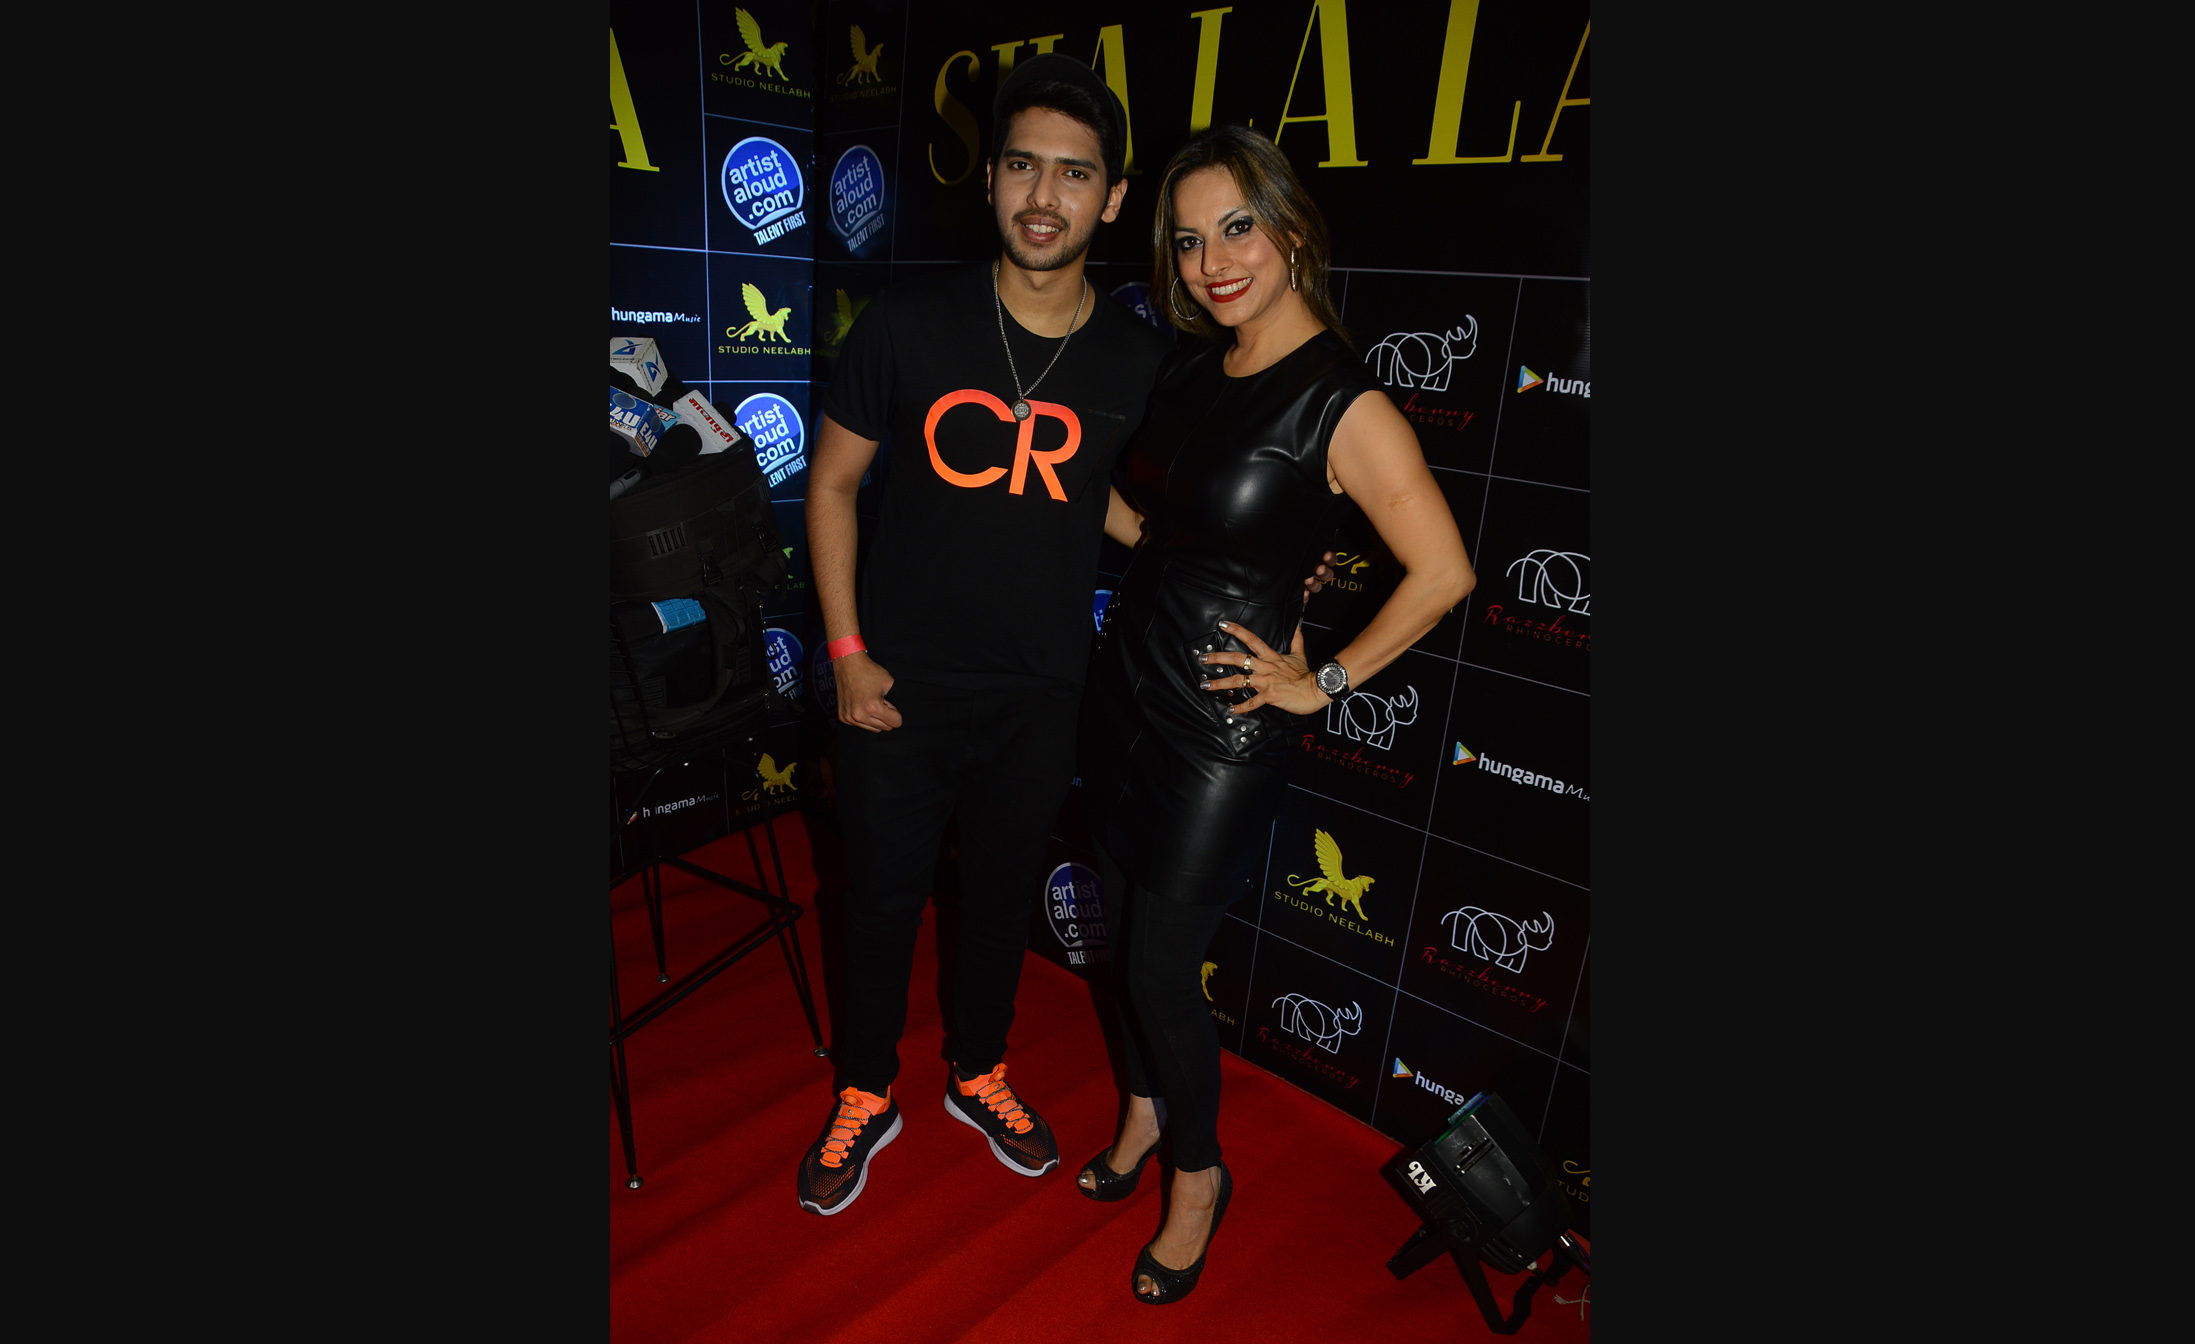 Armaan Malik and Preety Bhalla celebrate the launch of Preety's new single on Hungama presented by Artist Aloud